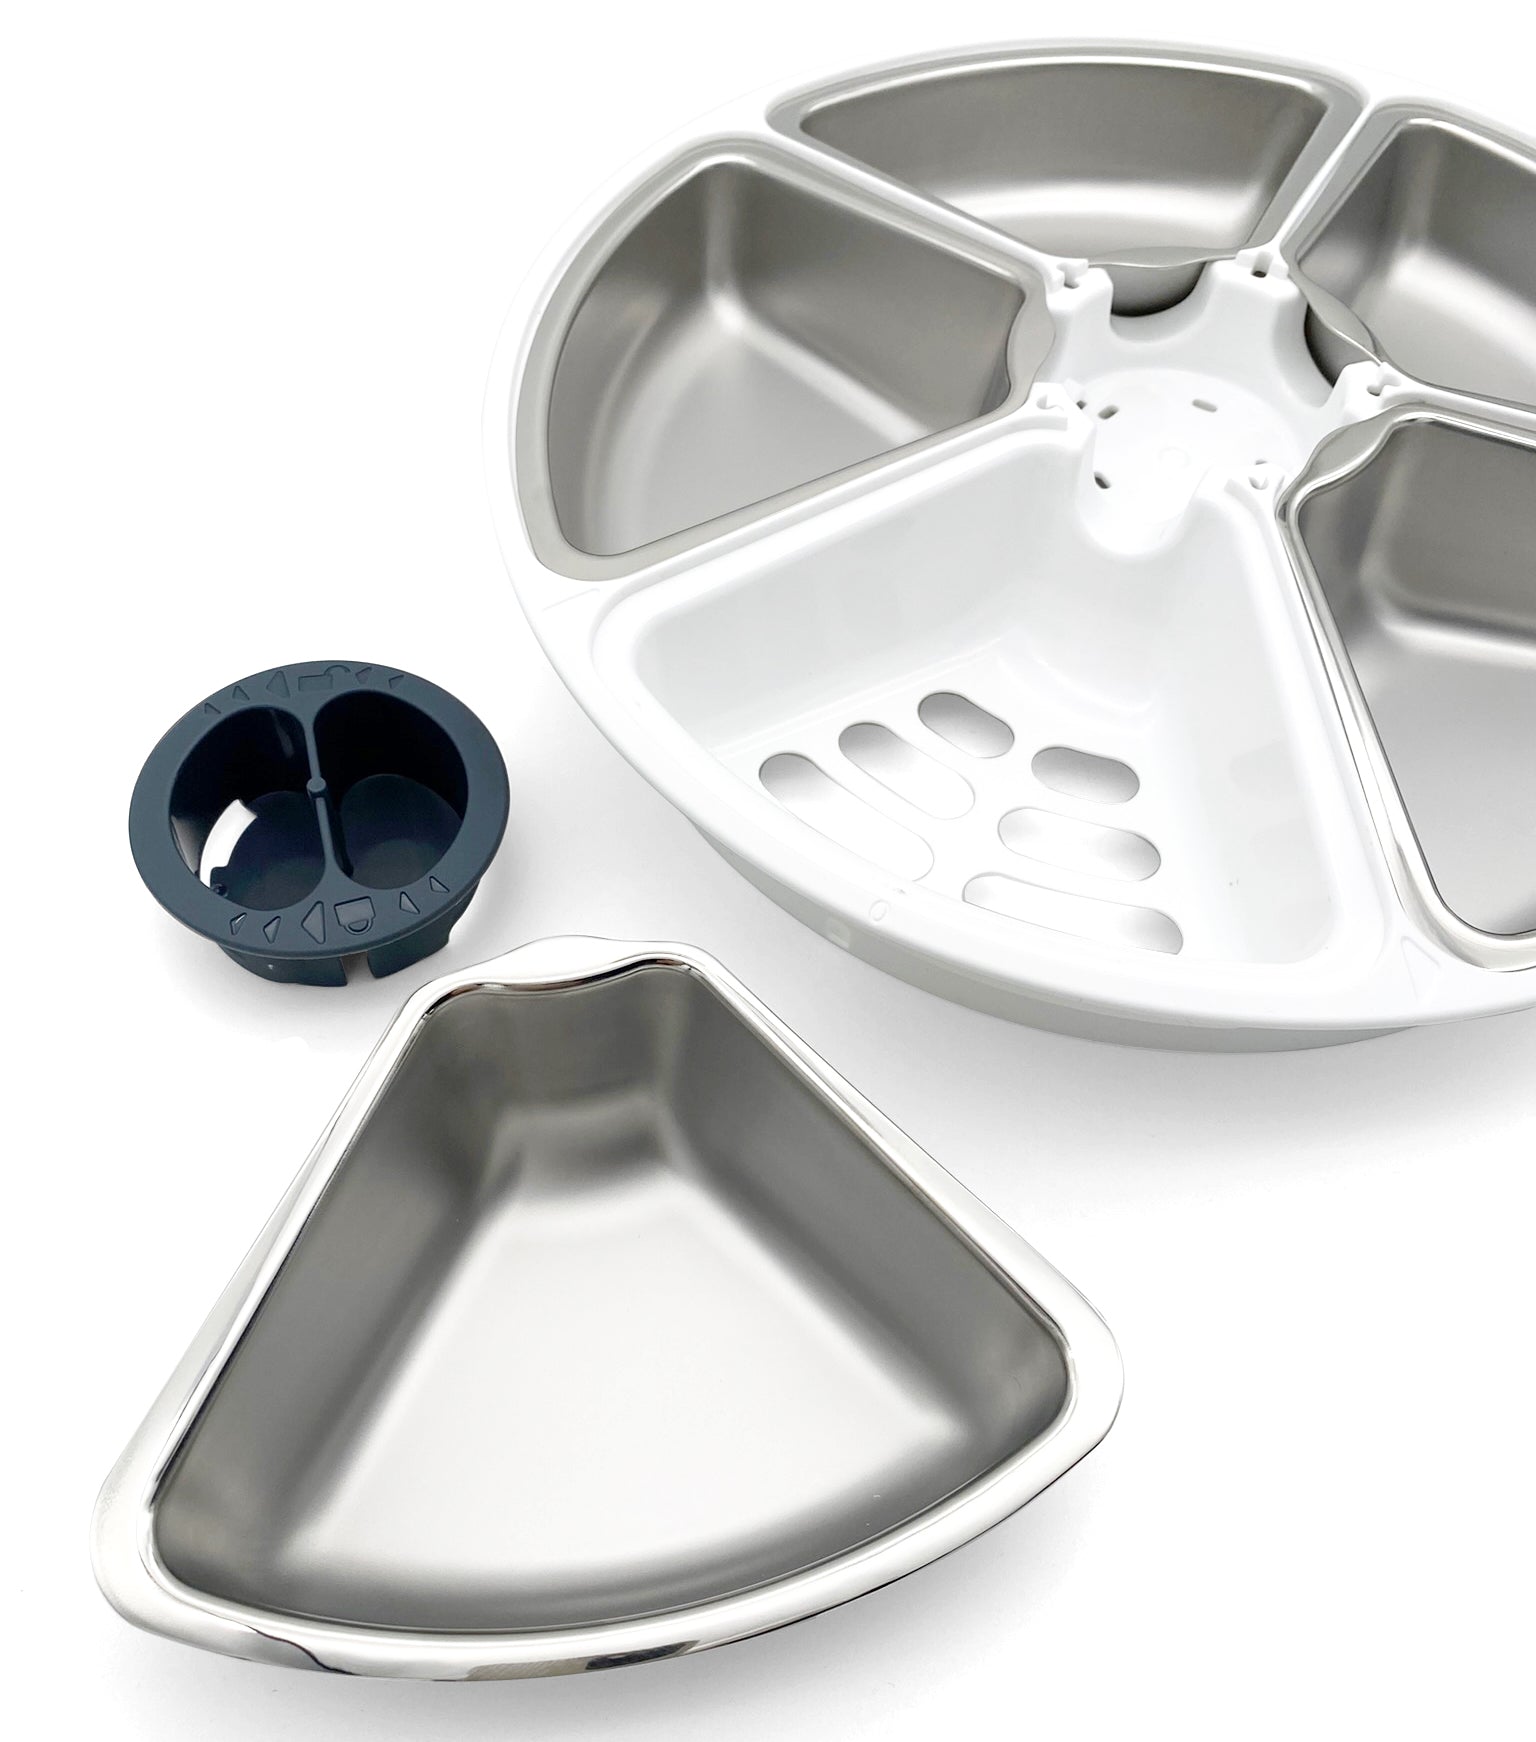 Closer Pets Stainless Steel Inserts x 5 for Five-meal Automatic Pet Feeders (464)